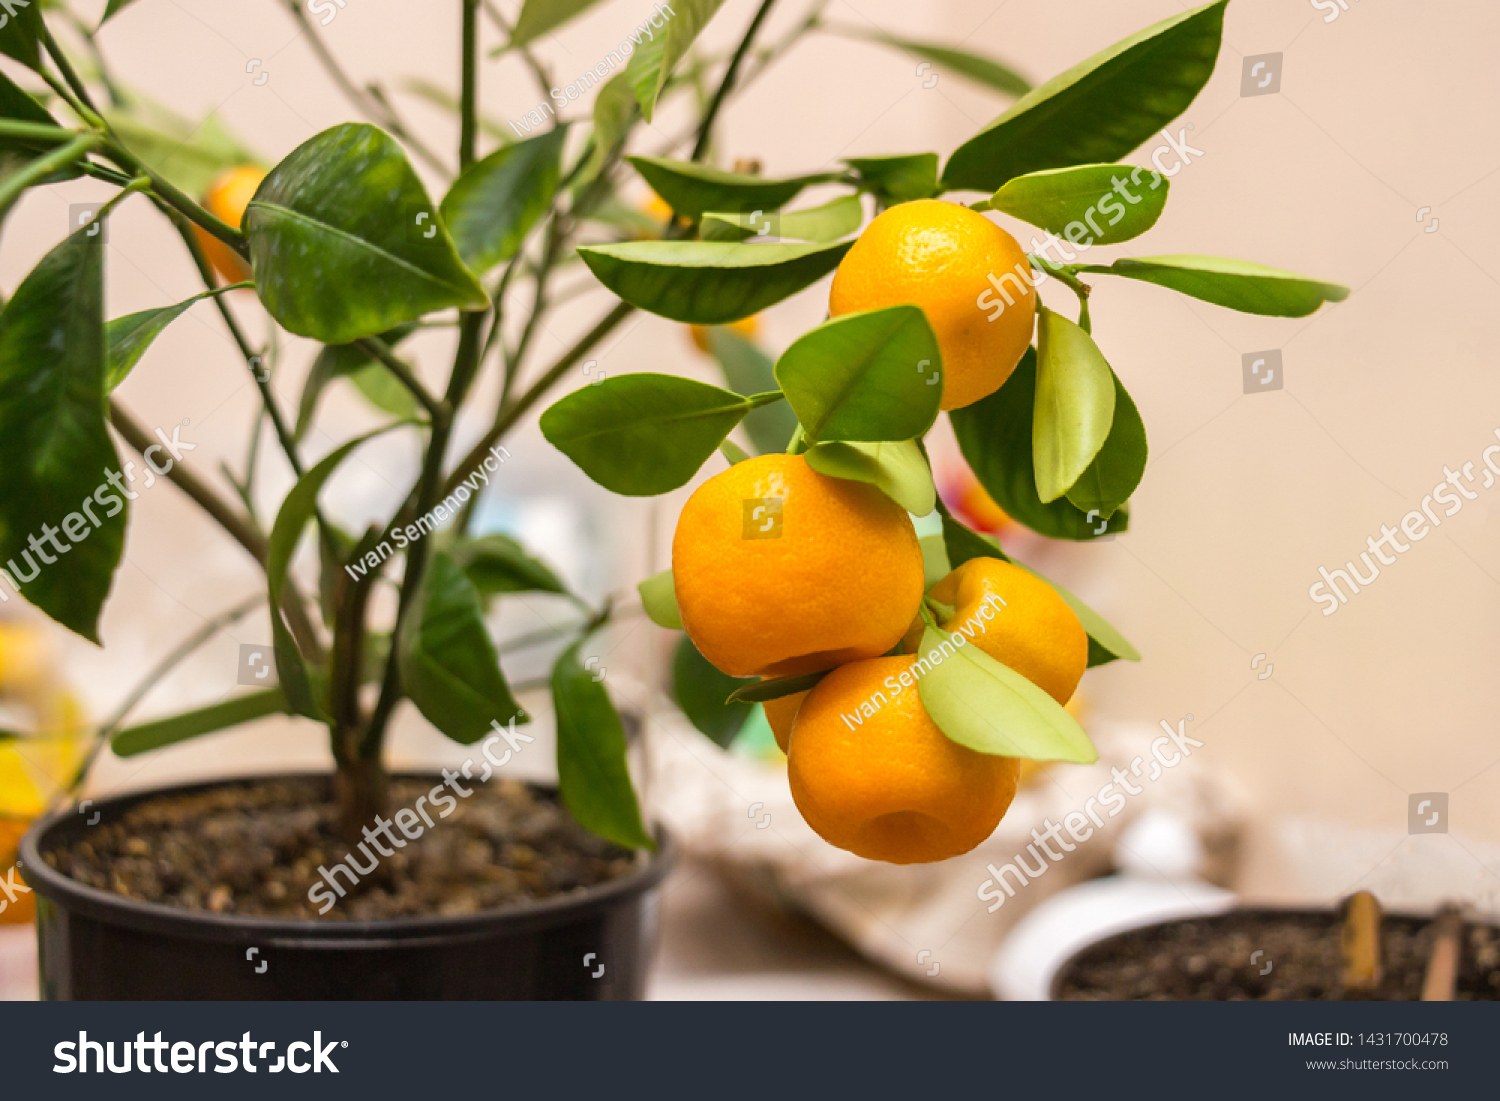 Branch of a Calamondin citrus plant grown in a pot with ripe orange fruits and green leaves. Citrofortunella microcarpa, Citrus madurensis. Indoor citrus tree growing. Close-up with selective focus #1431700478